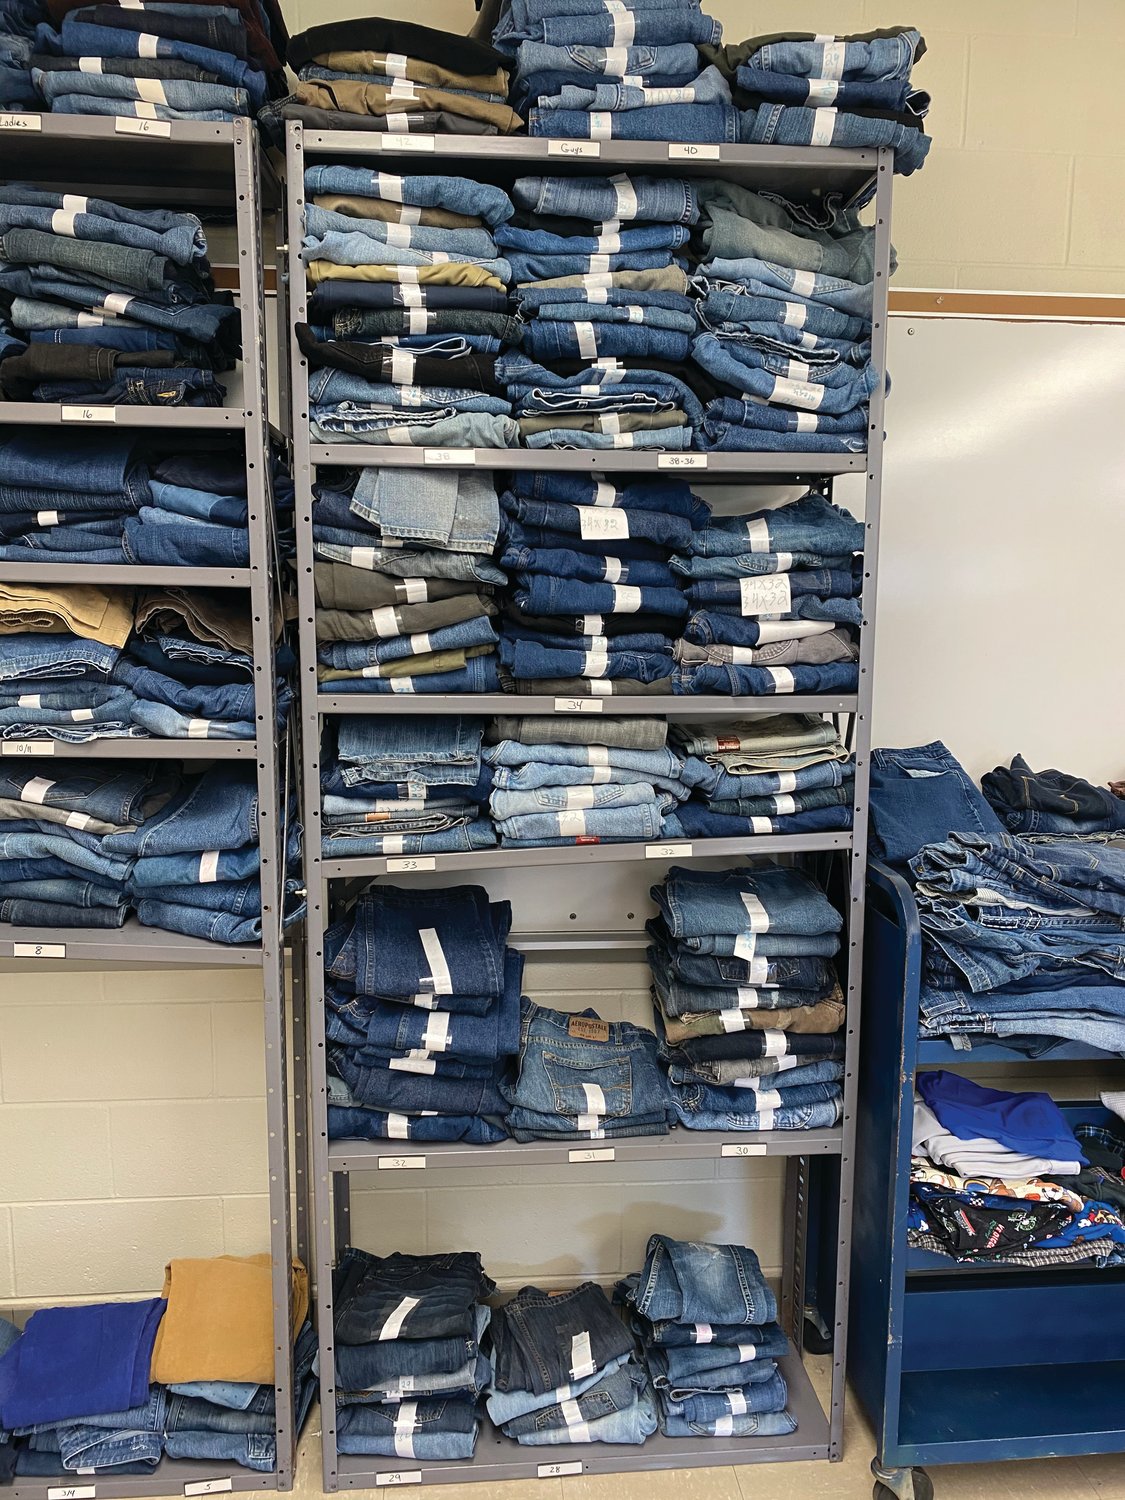 If Fountain Cenral students are in need of jeans, the Mustang Mall has a large selection to choose from.